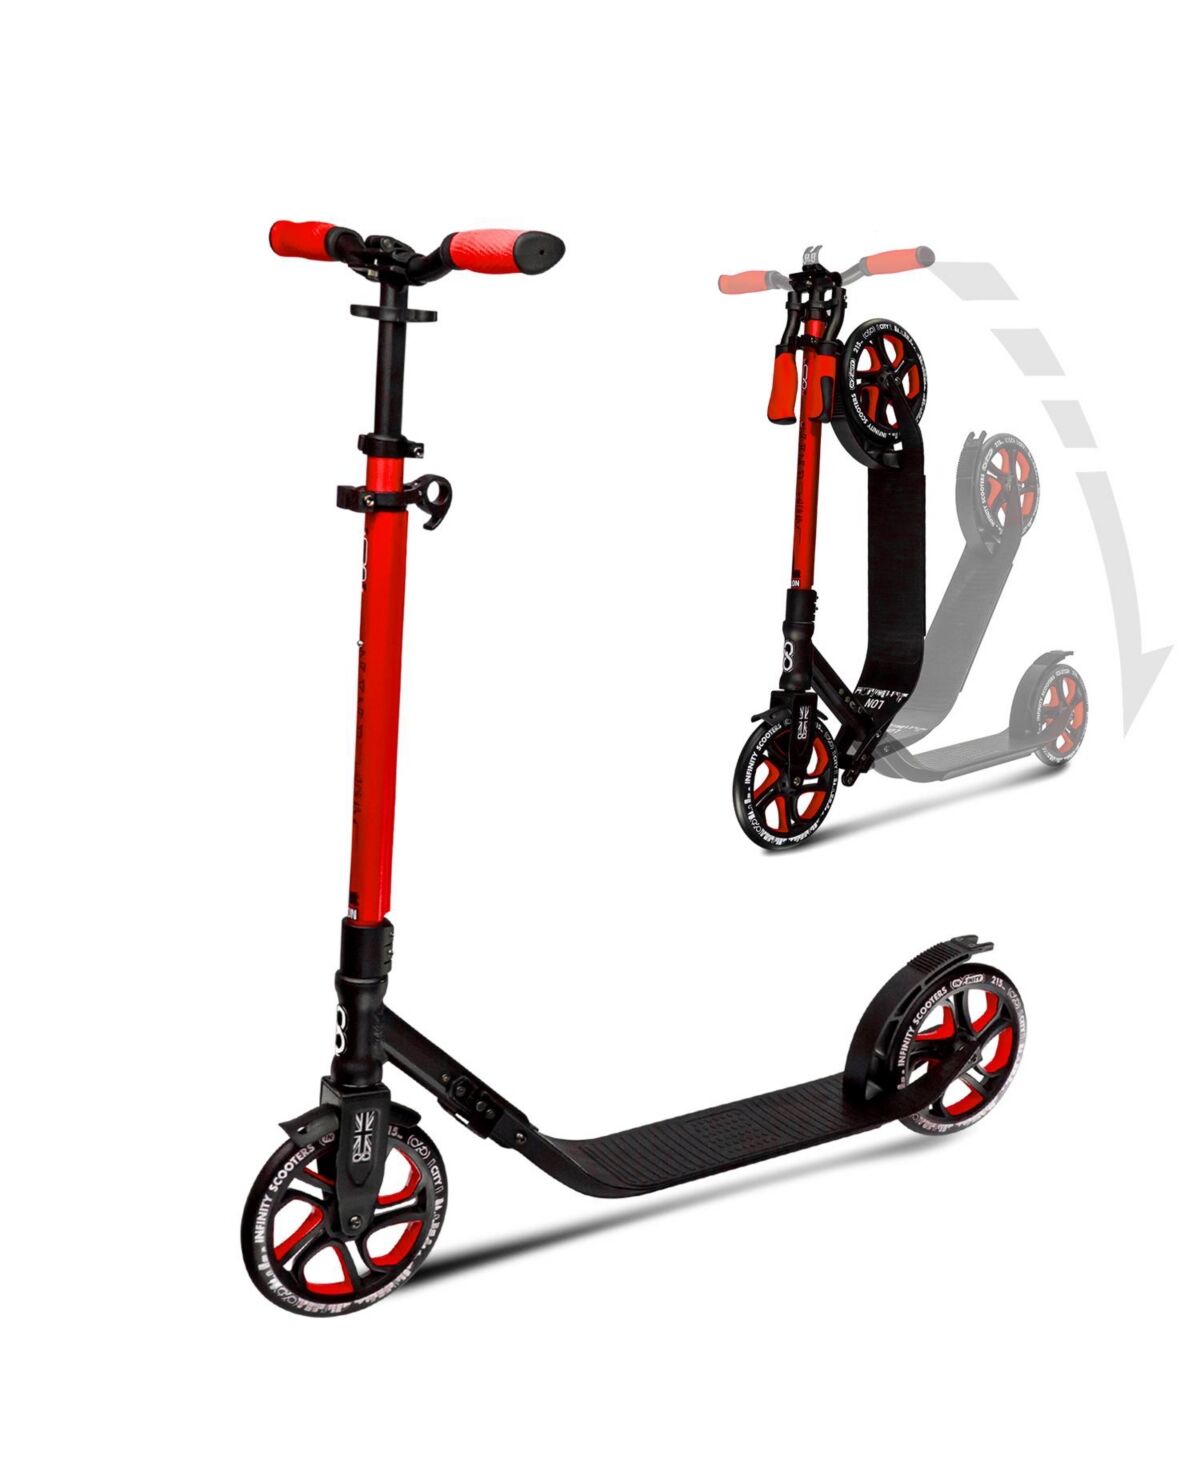 Crazy Skates London Foldable Kick Scooter - Great Scooters For Teens And Adults - Red